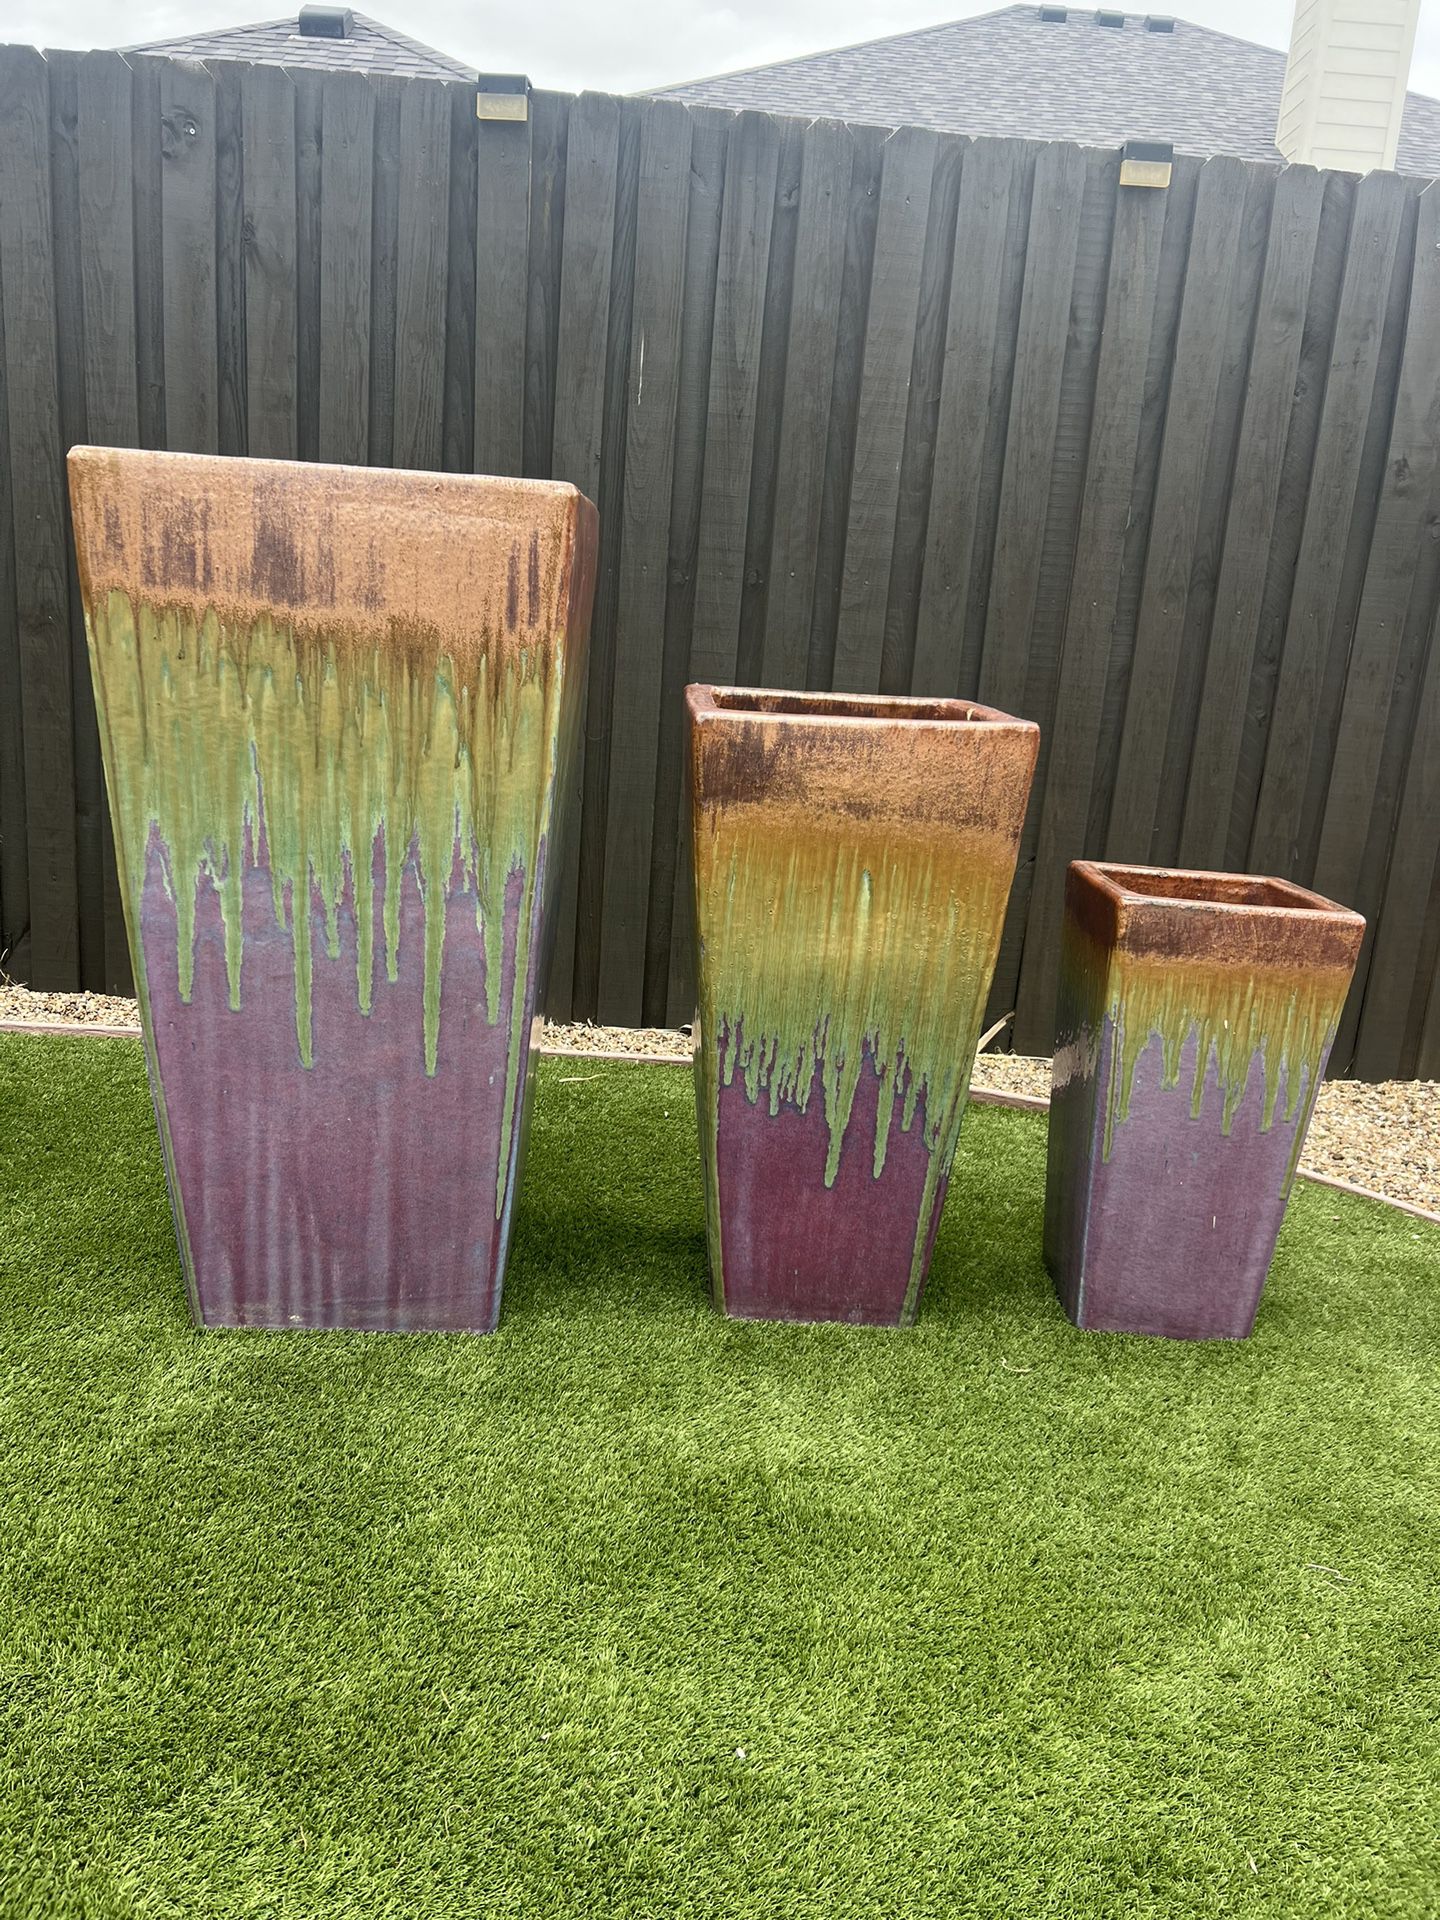 "Elegant Tall Ceramic Planters - Set of 3 - $1500 - Free Delivery in Corpus Christi"